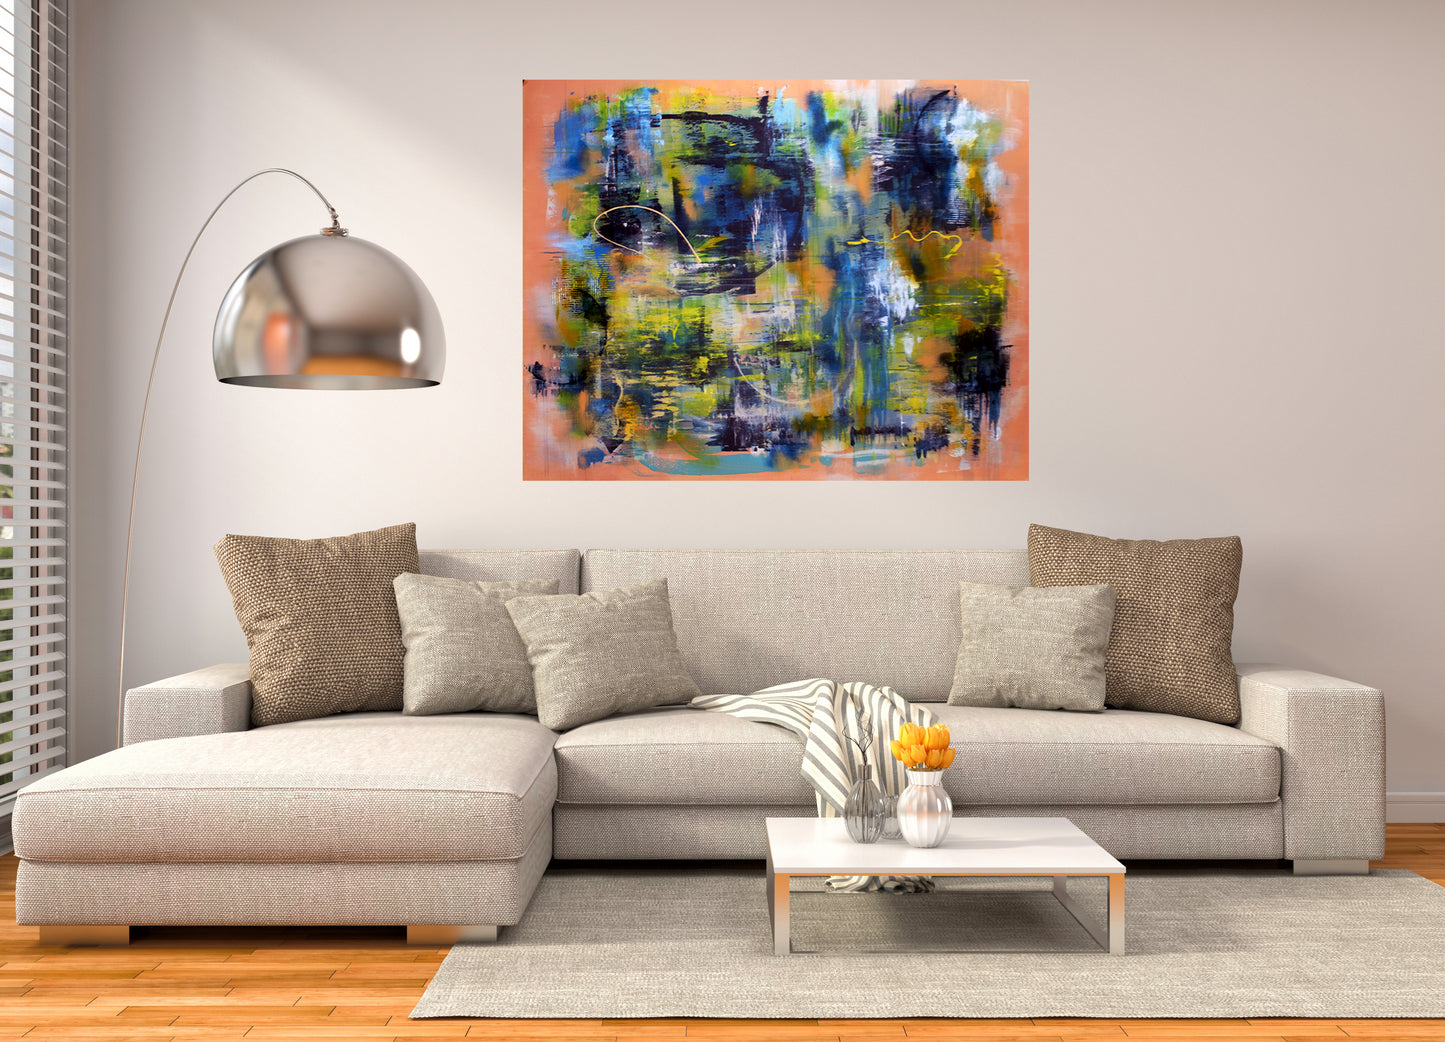 Pretty & Peach #1 (48x60 Gallery Wrapped Canvas) or 10 Months Interest Free with Art Money